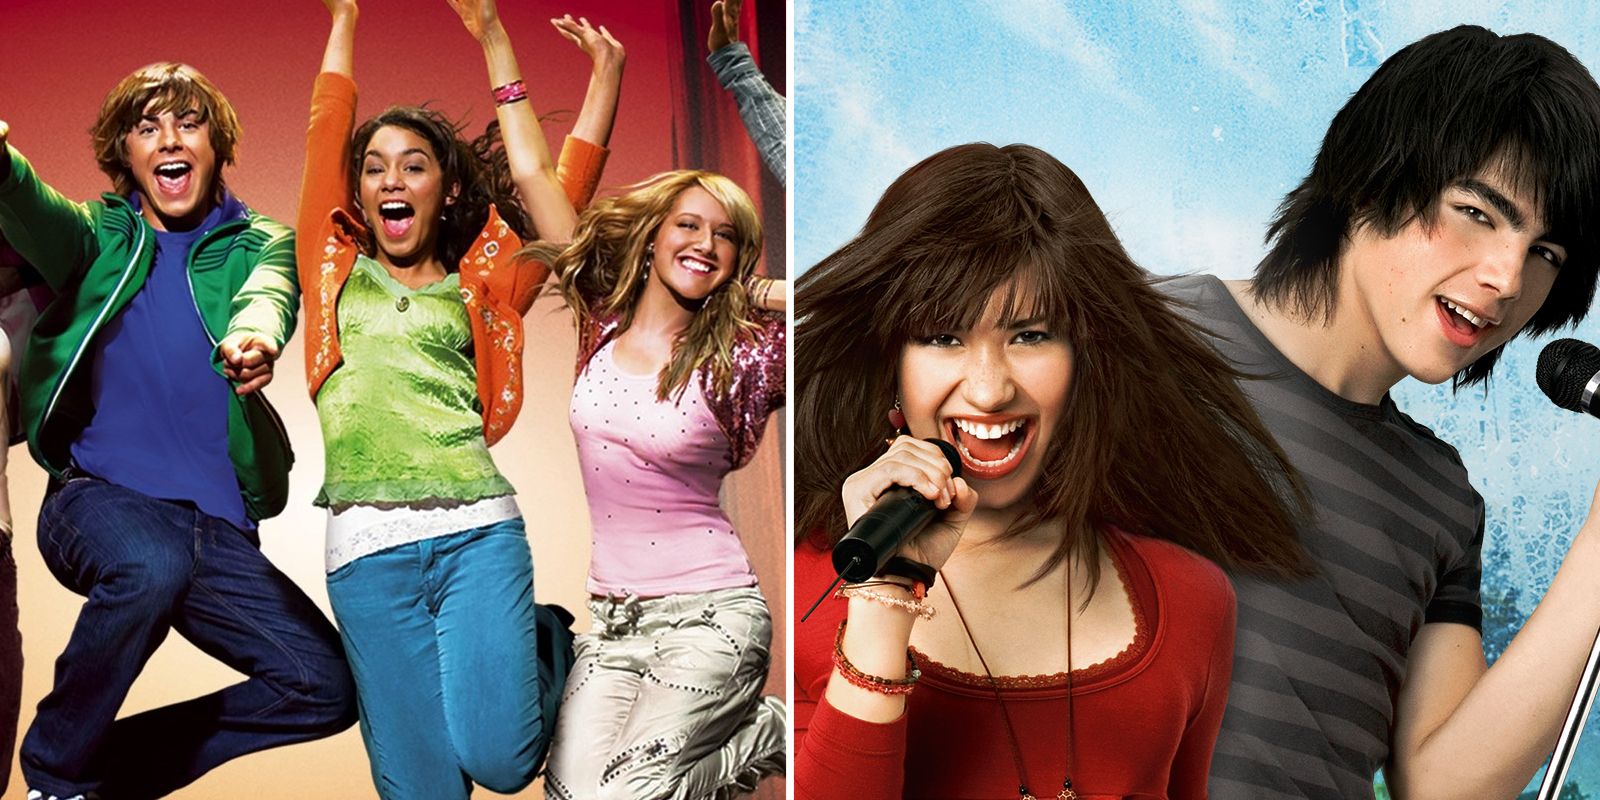 5 Things The High School Musical Series Does Better Than Camp Rock (& 5 The Camp Rock Series Does Better)